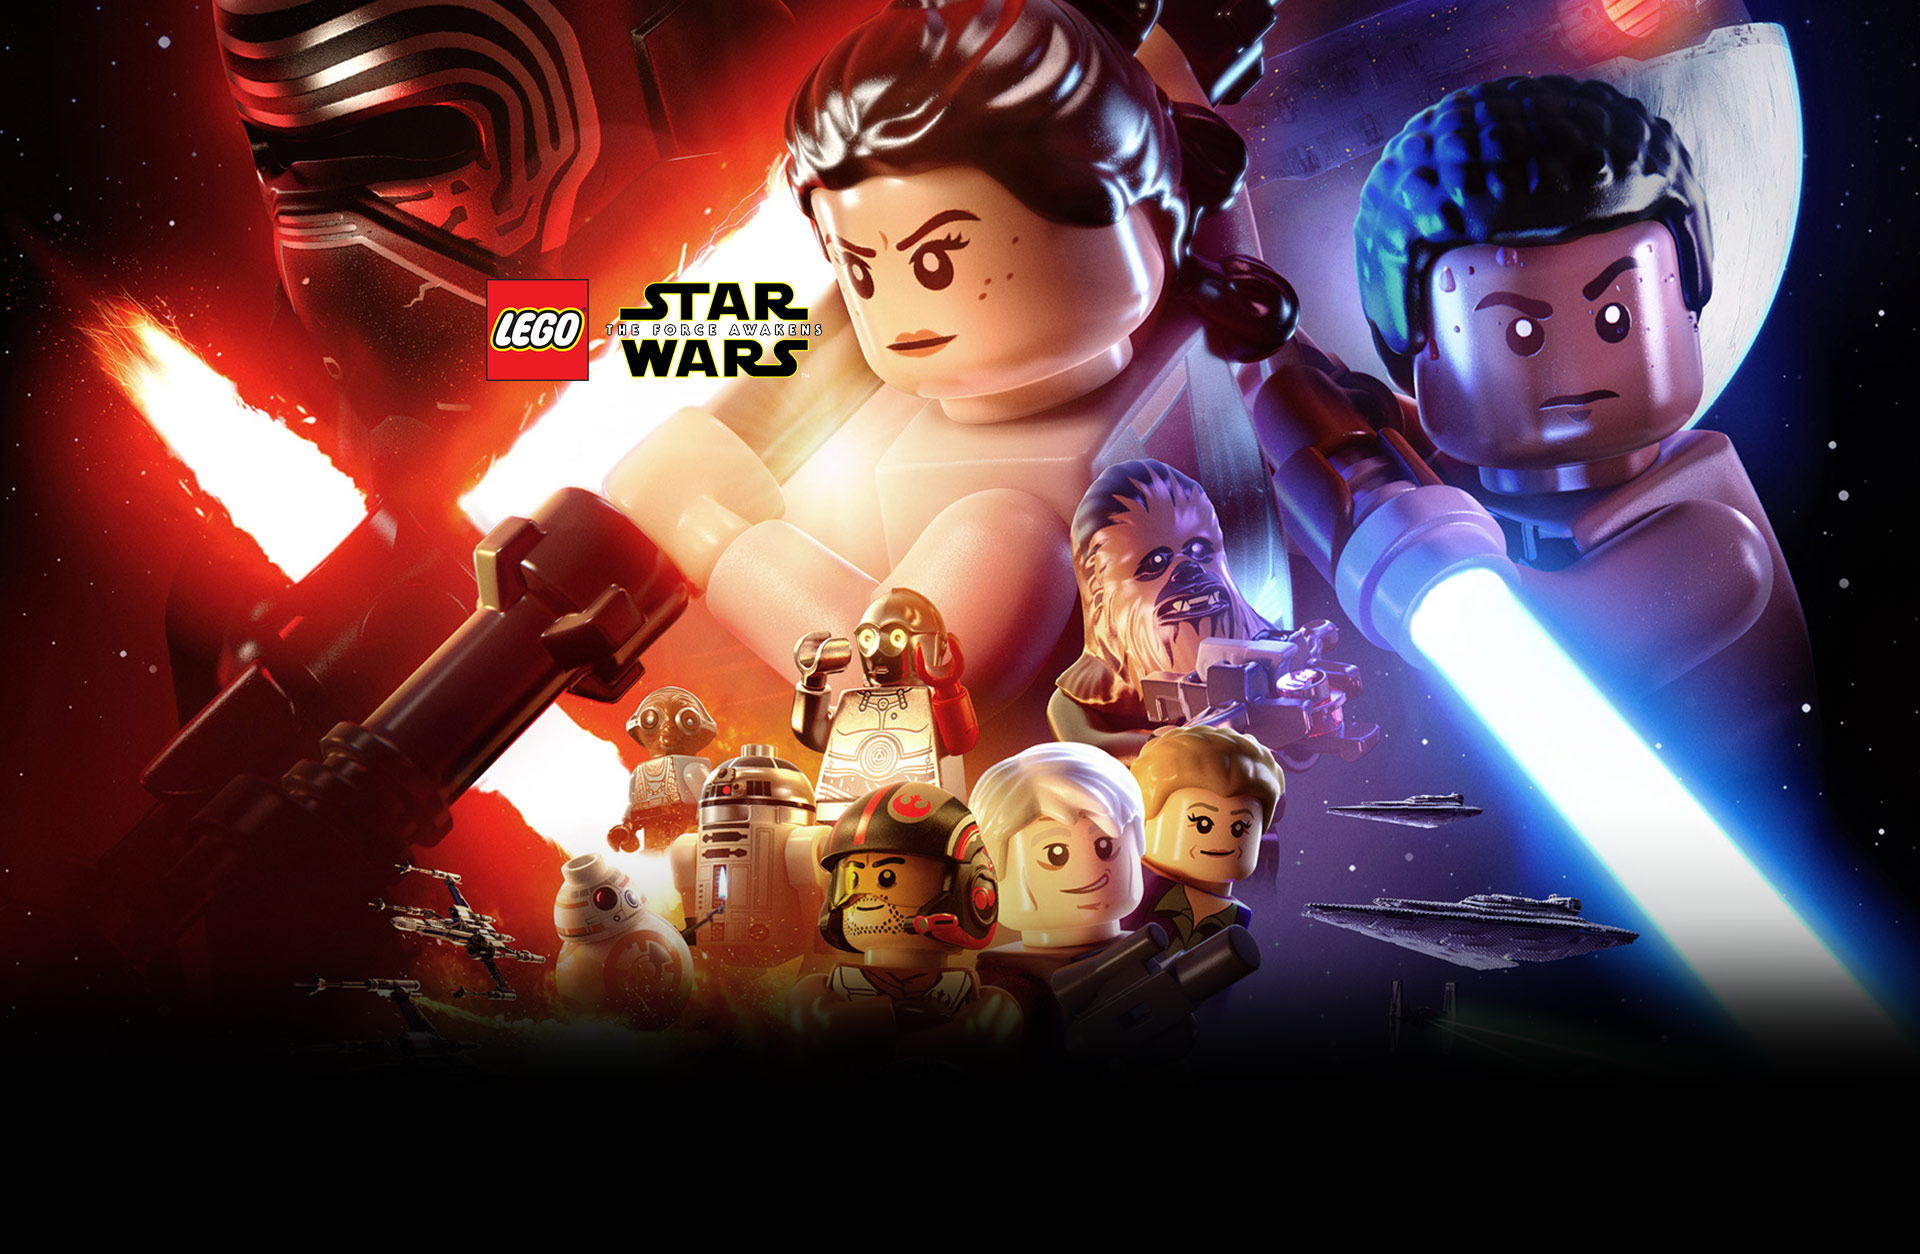 LEGO Star Wars: The Force Awakens - Deluxe Edition